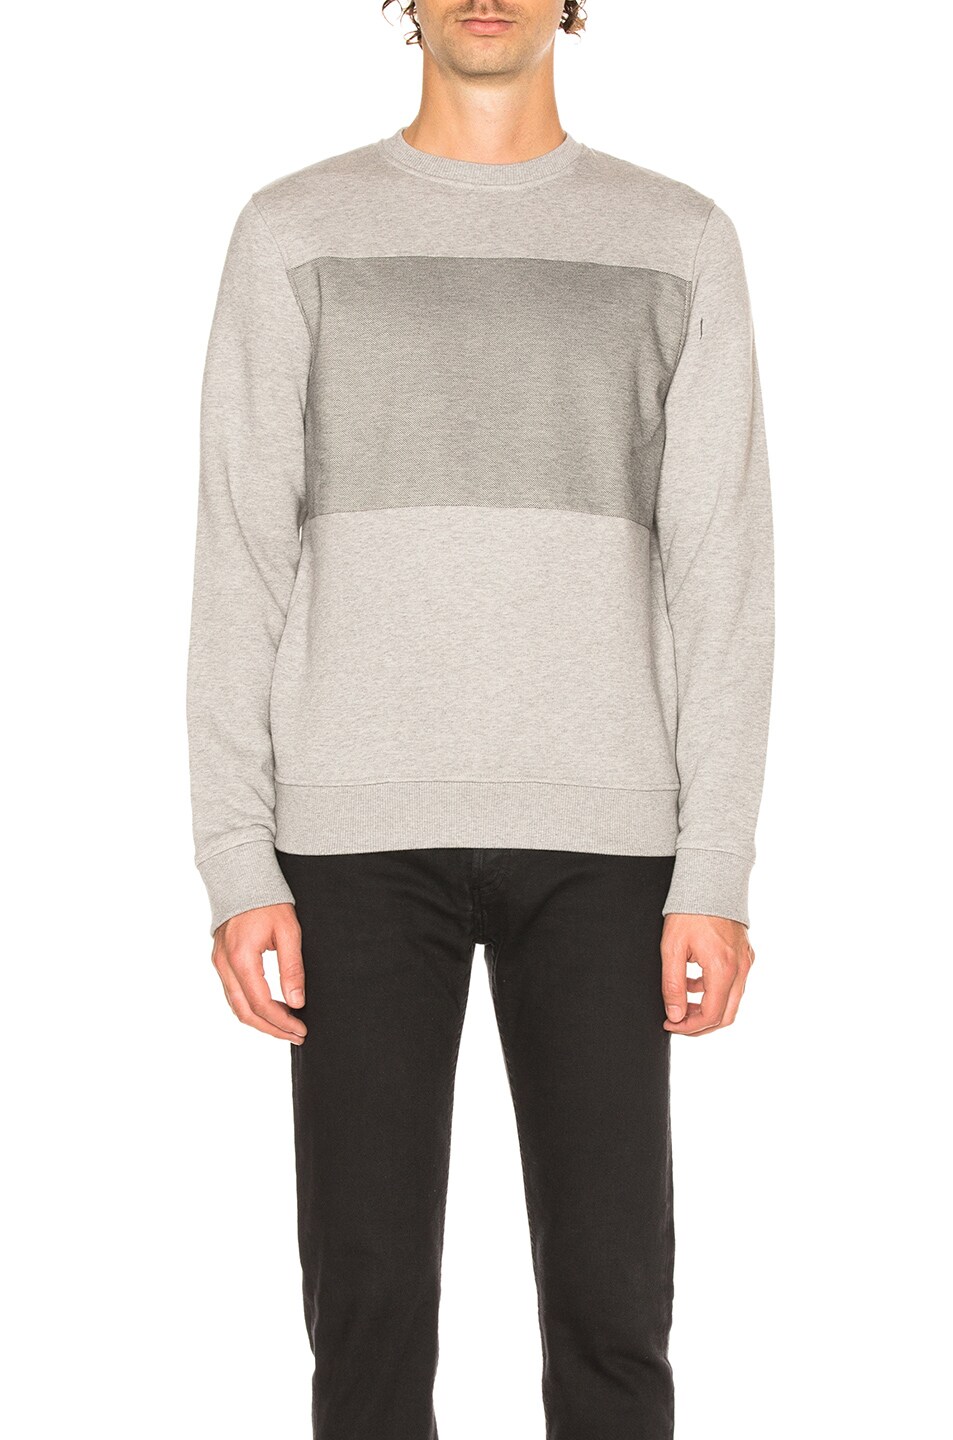 Image 1 of A.P.C. Shine Sweatshirt in Gris Chine Clair